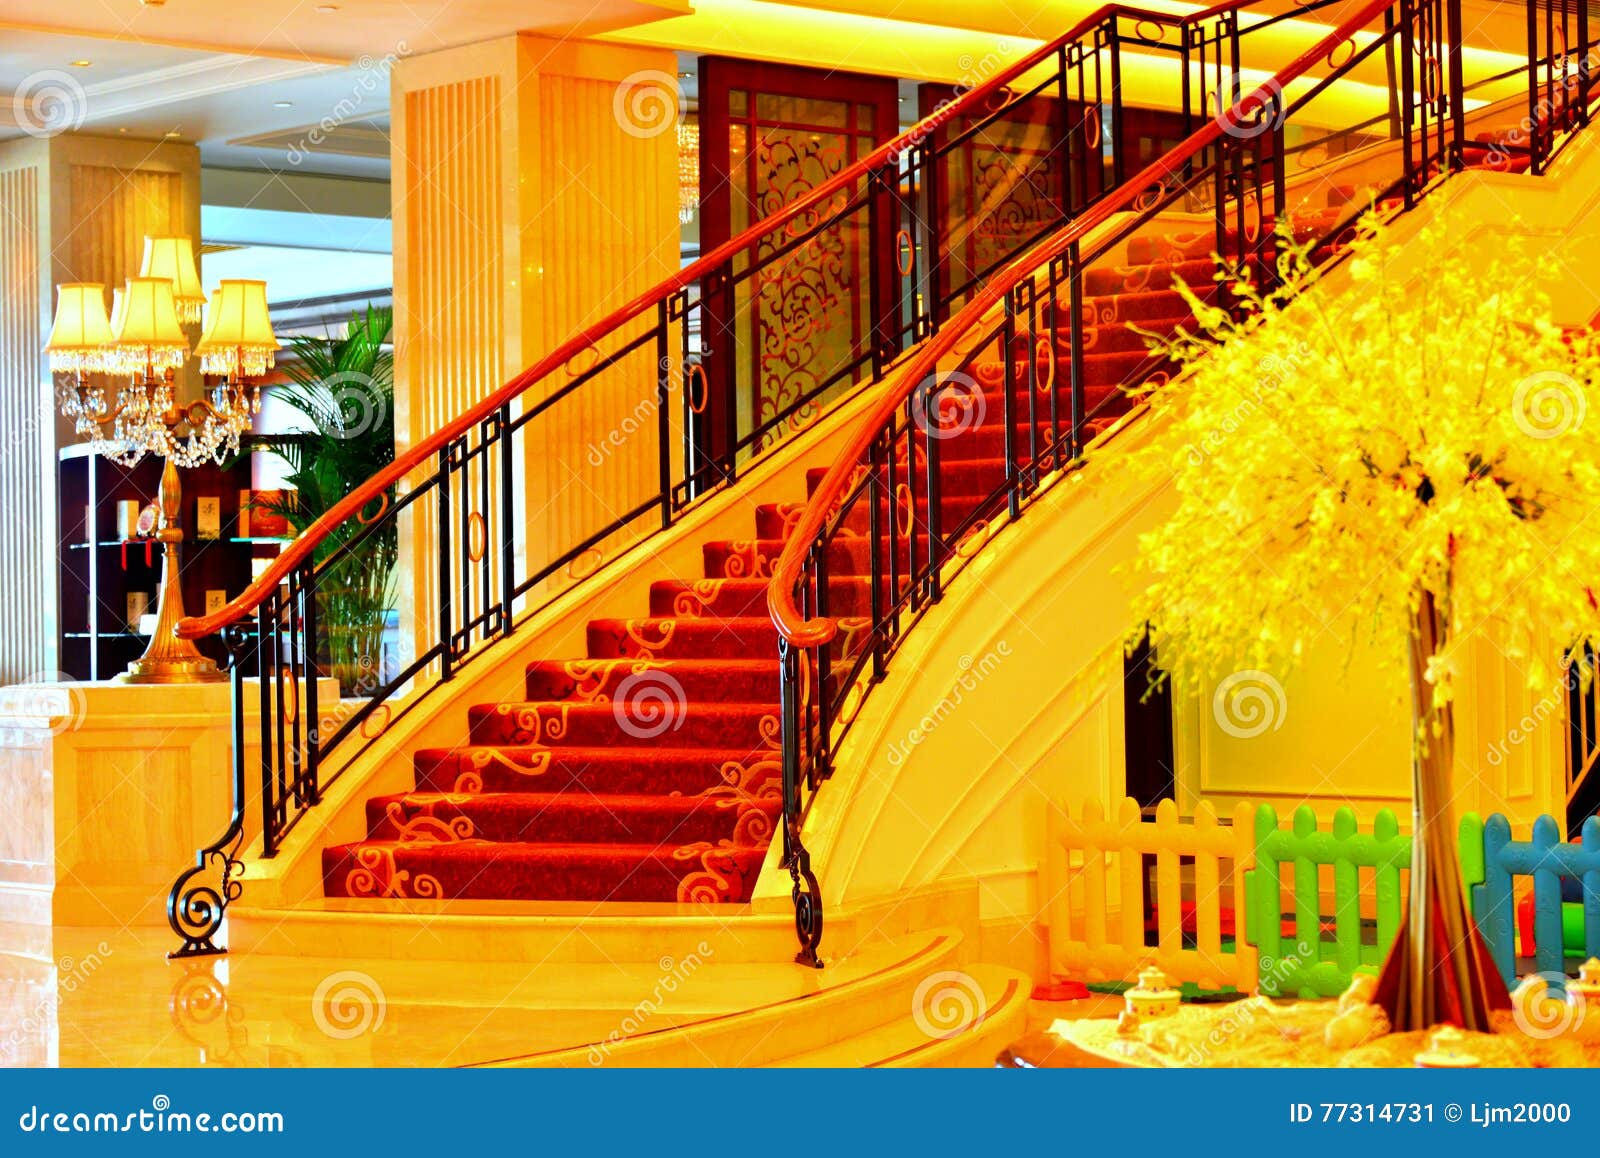 Hotel stairs editorial photo. Image of office, extravagant - 77314731